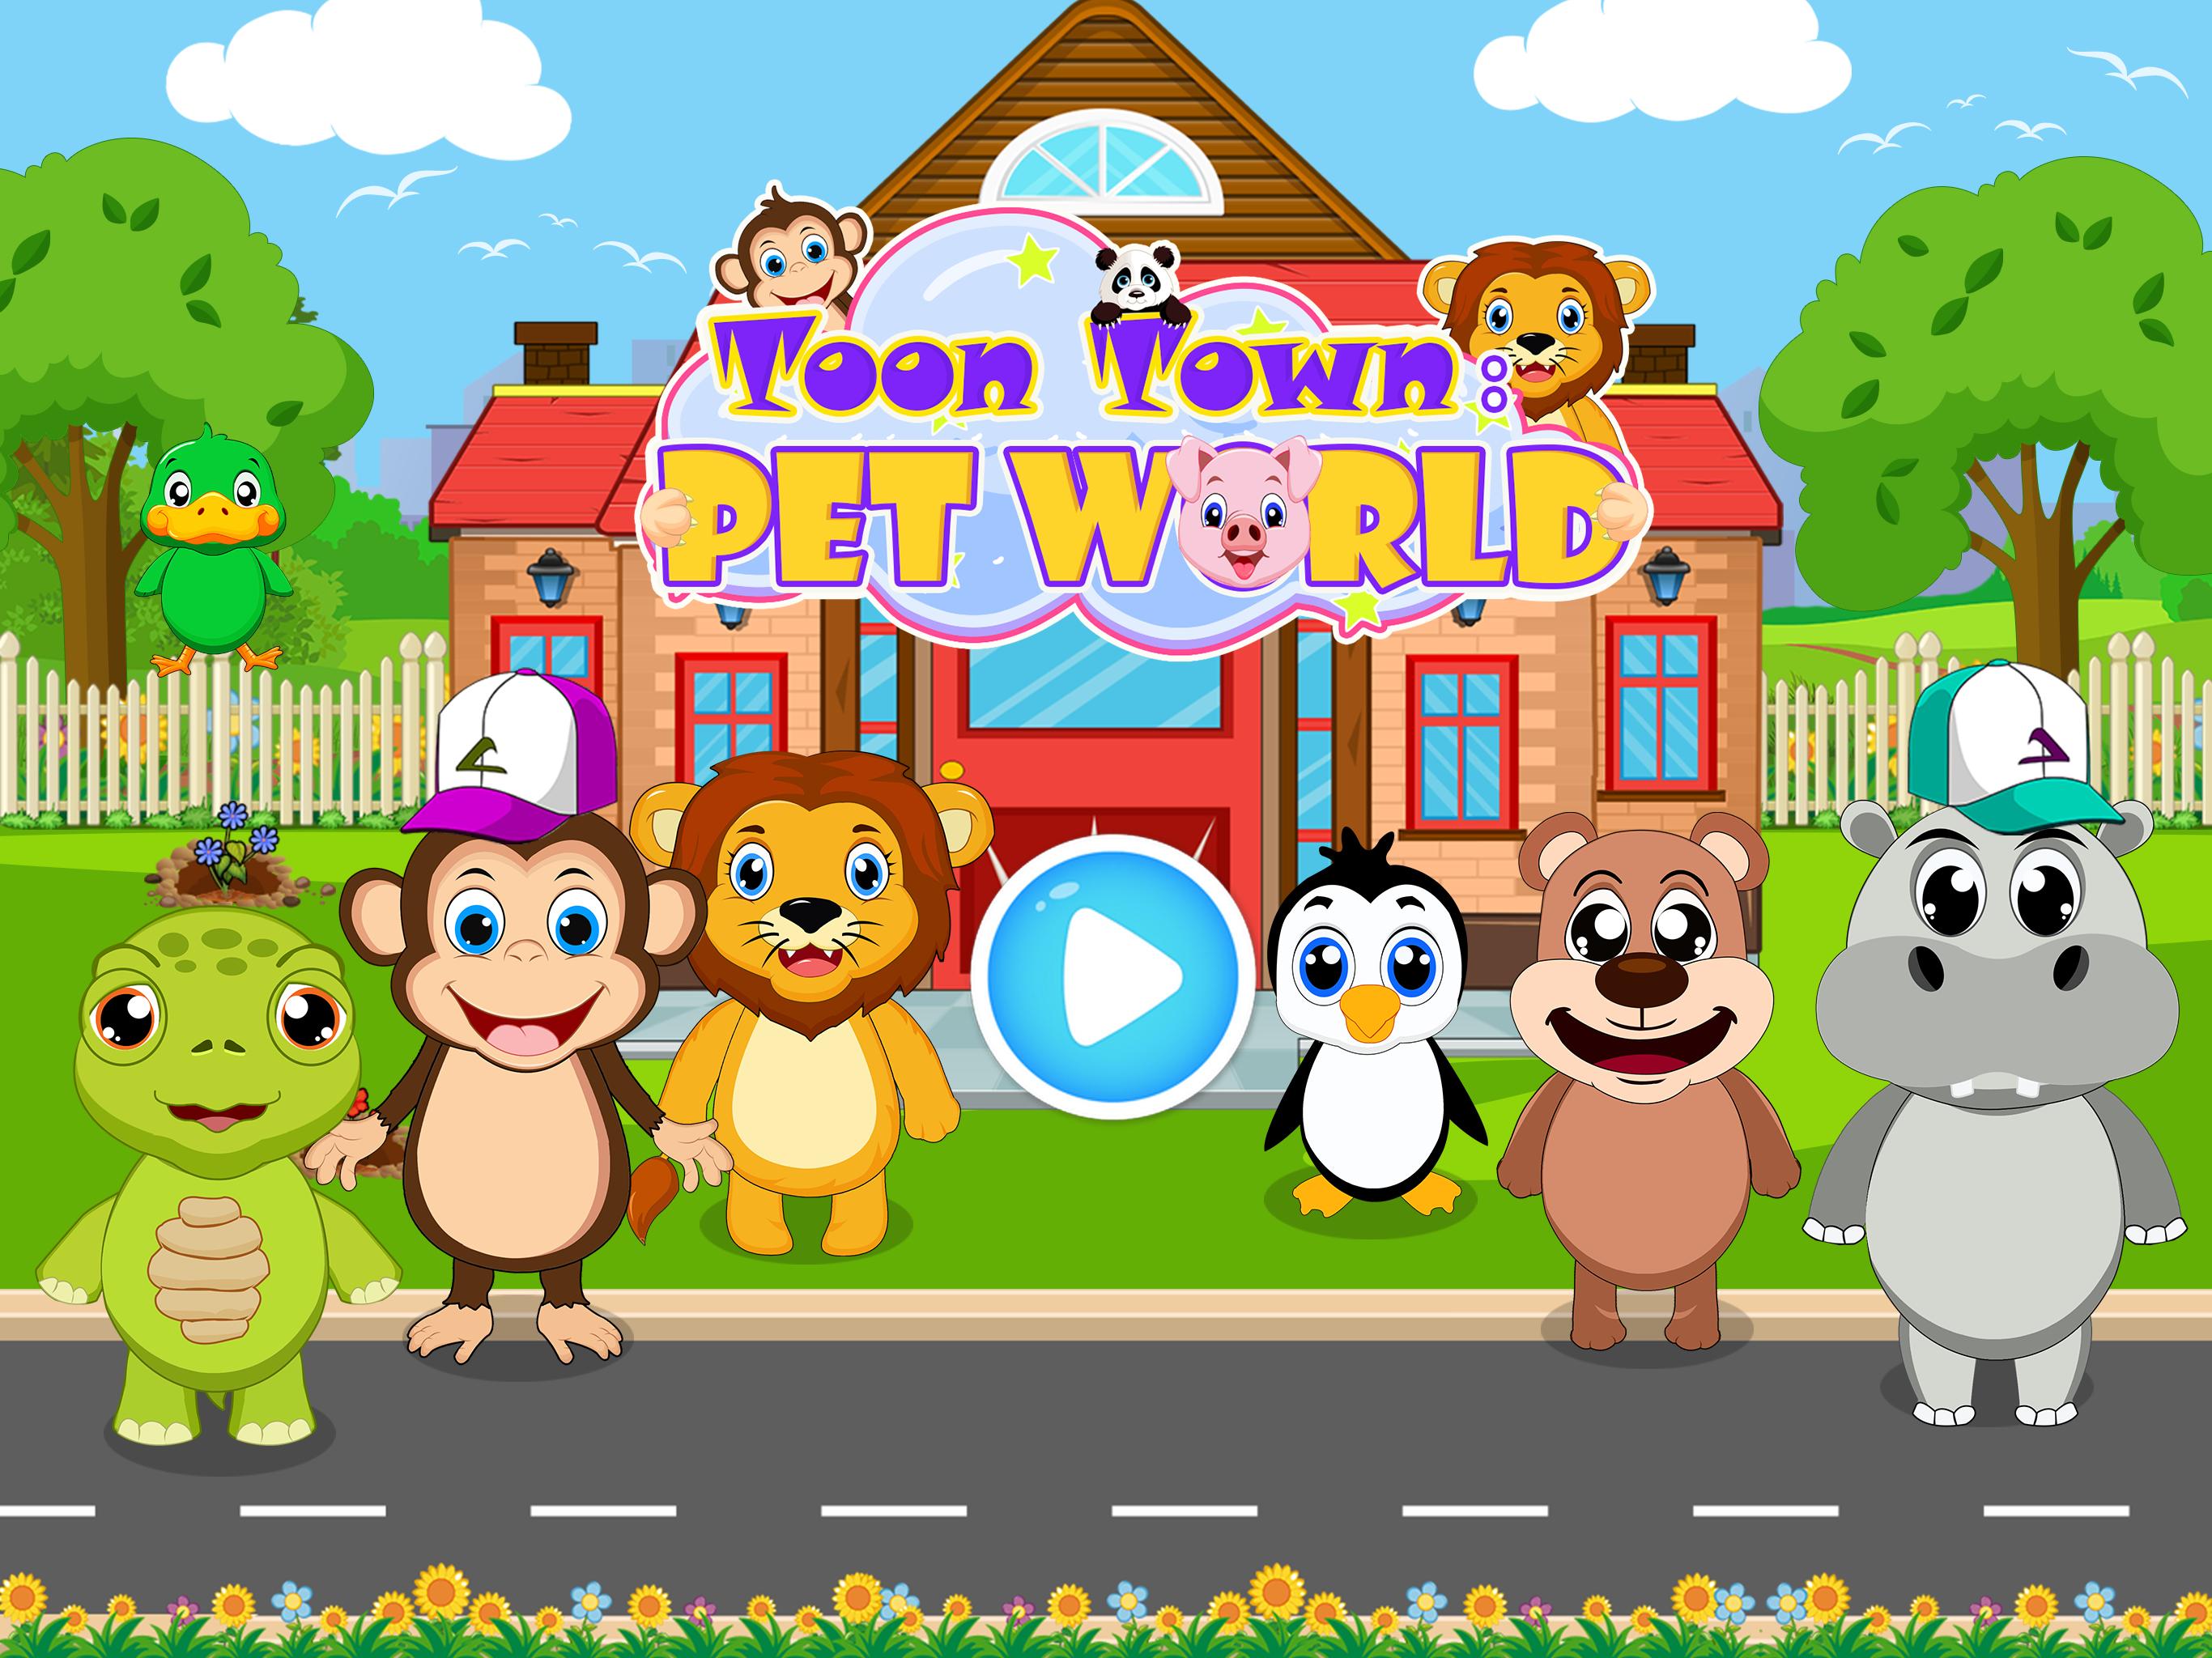 Pets town. Pet Town. Pets in Town. Yesa Pets Town. Bunnsies - Happy Pet World APK.